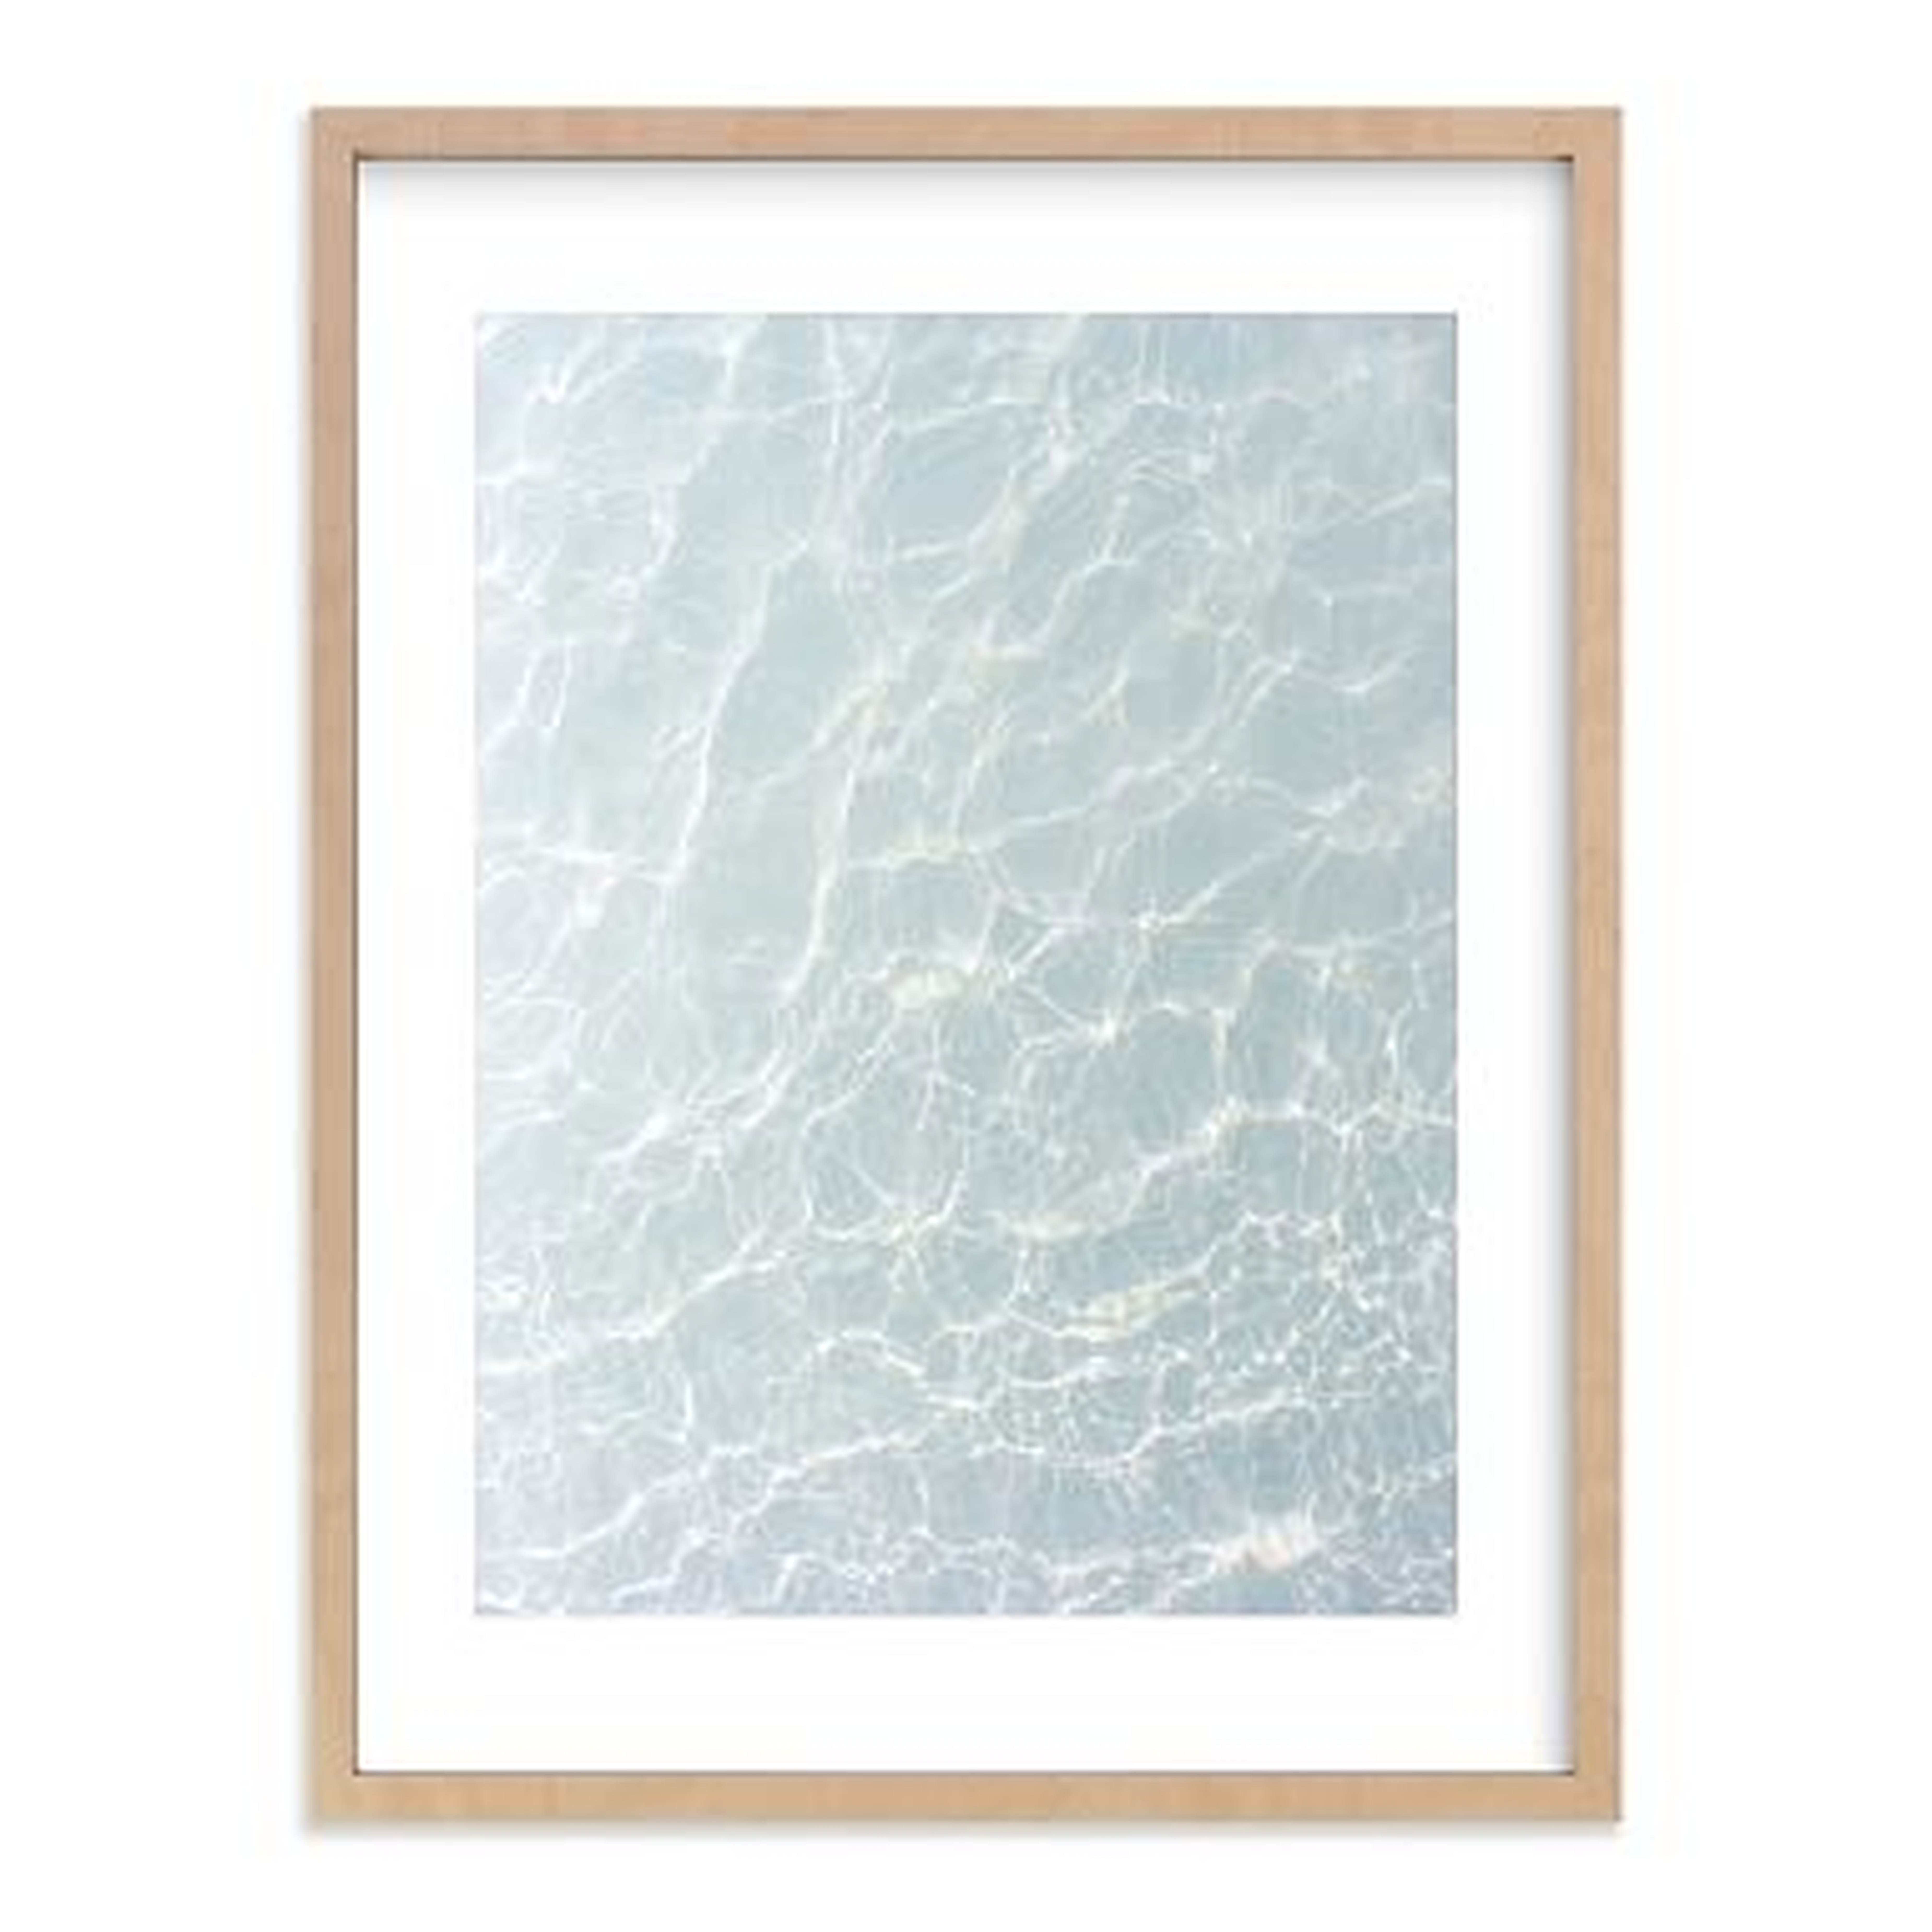 Wave Patterns Wall Art by Minted(R), 18"x24", Natural - Pottery Barn Teen